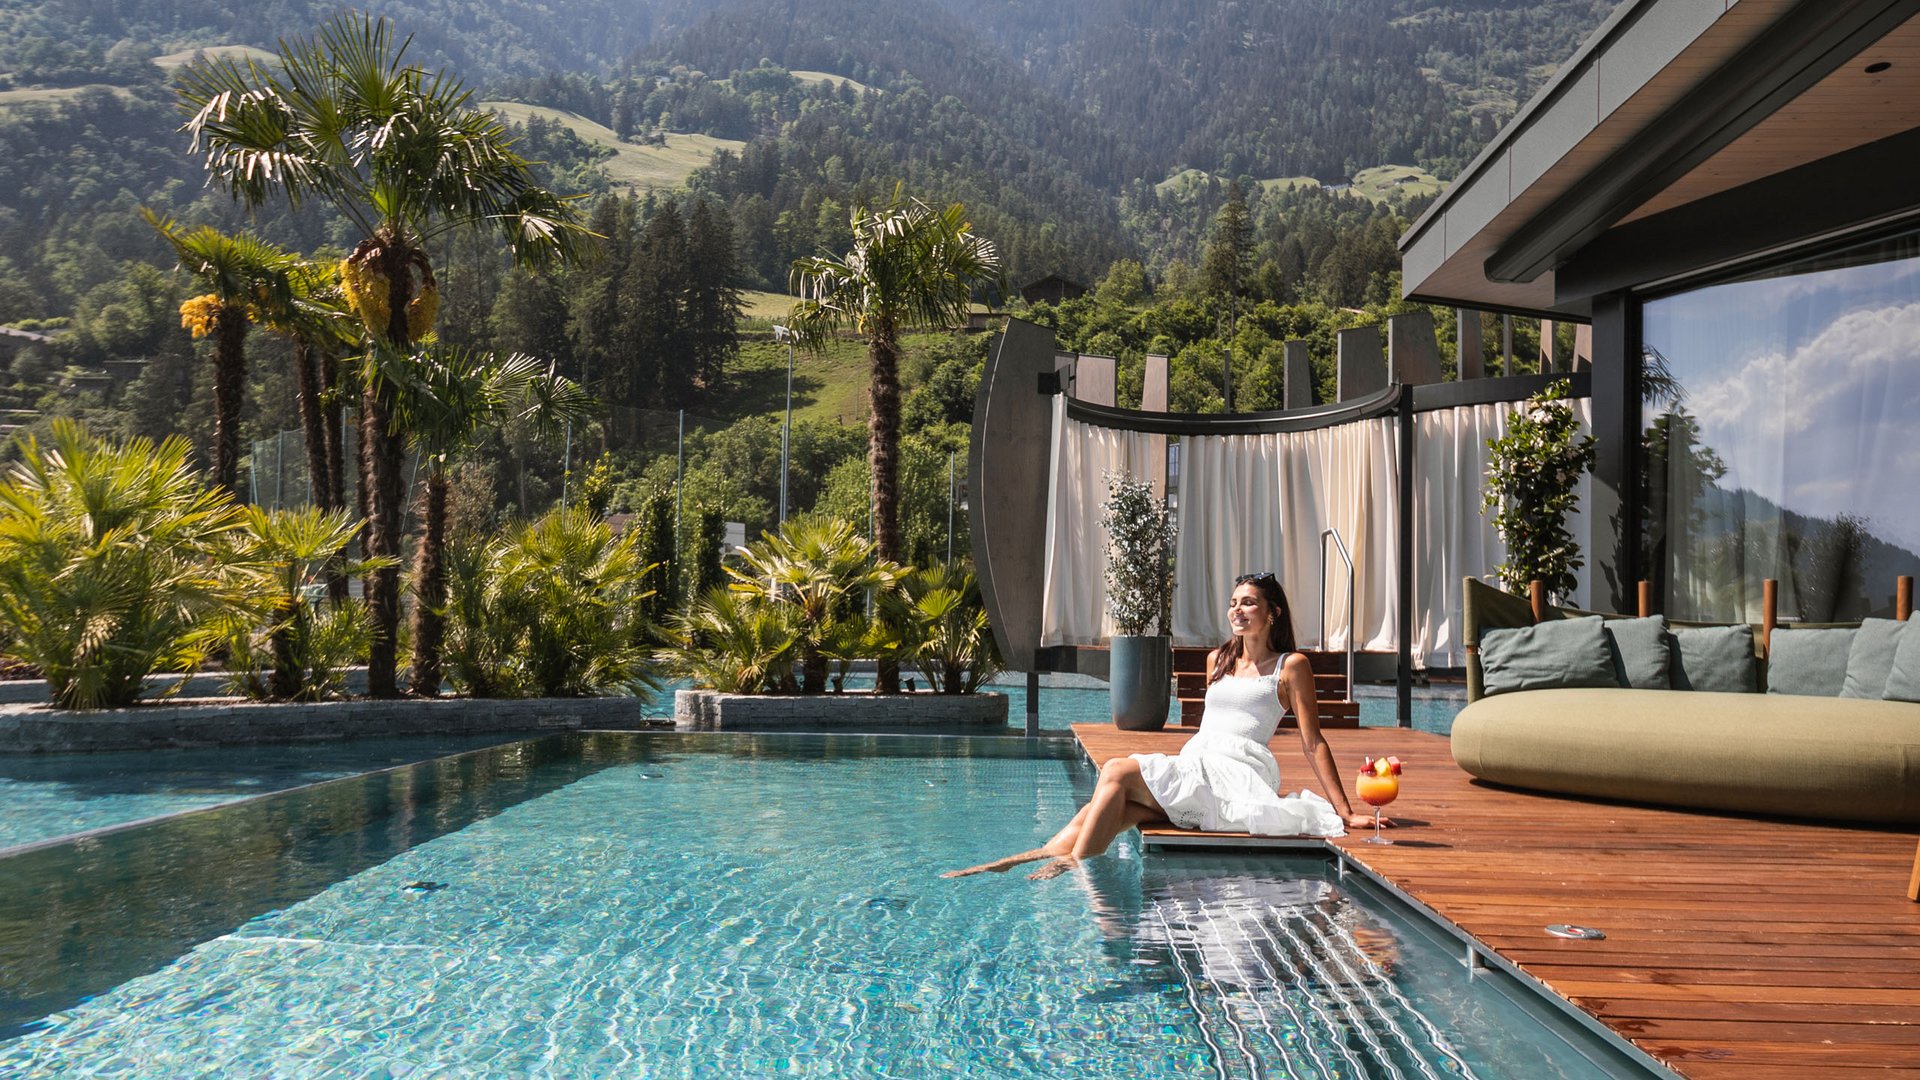 Your luxurious adults-only hotel in South Tyrol